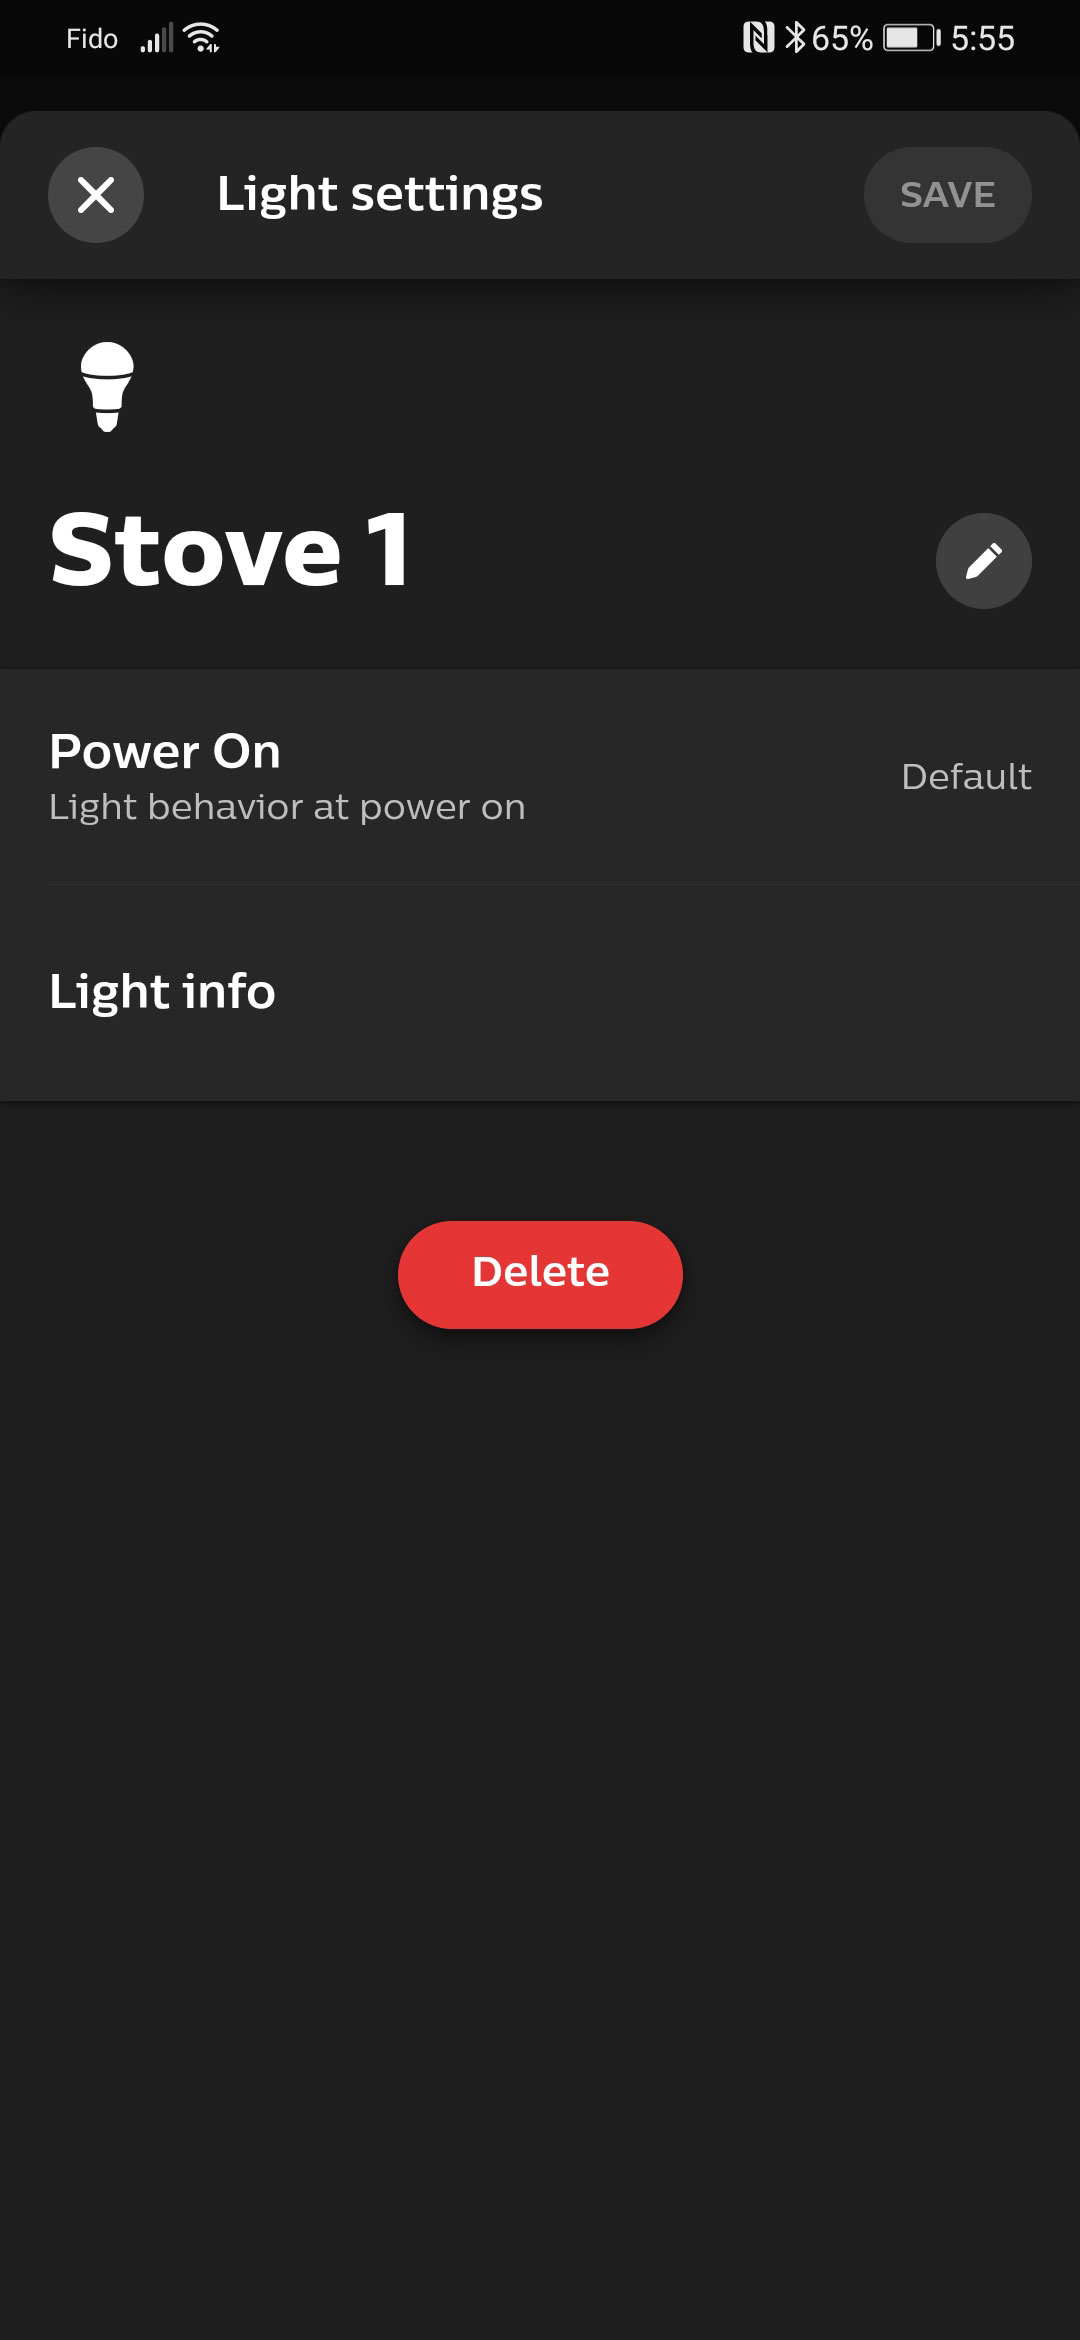 Philips Hue Android app open on light settings screen.